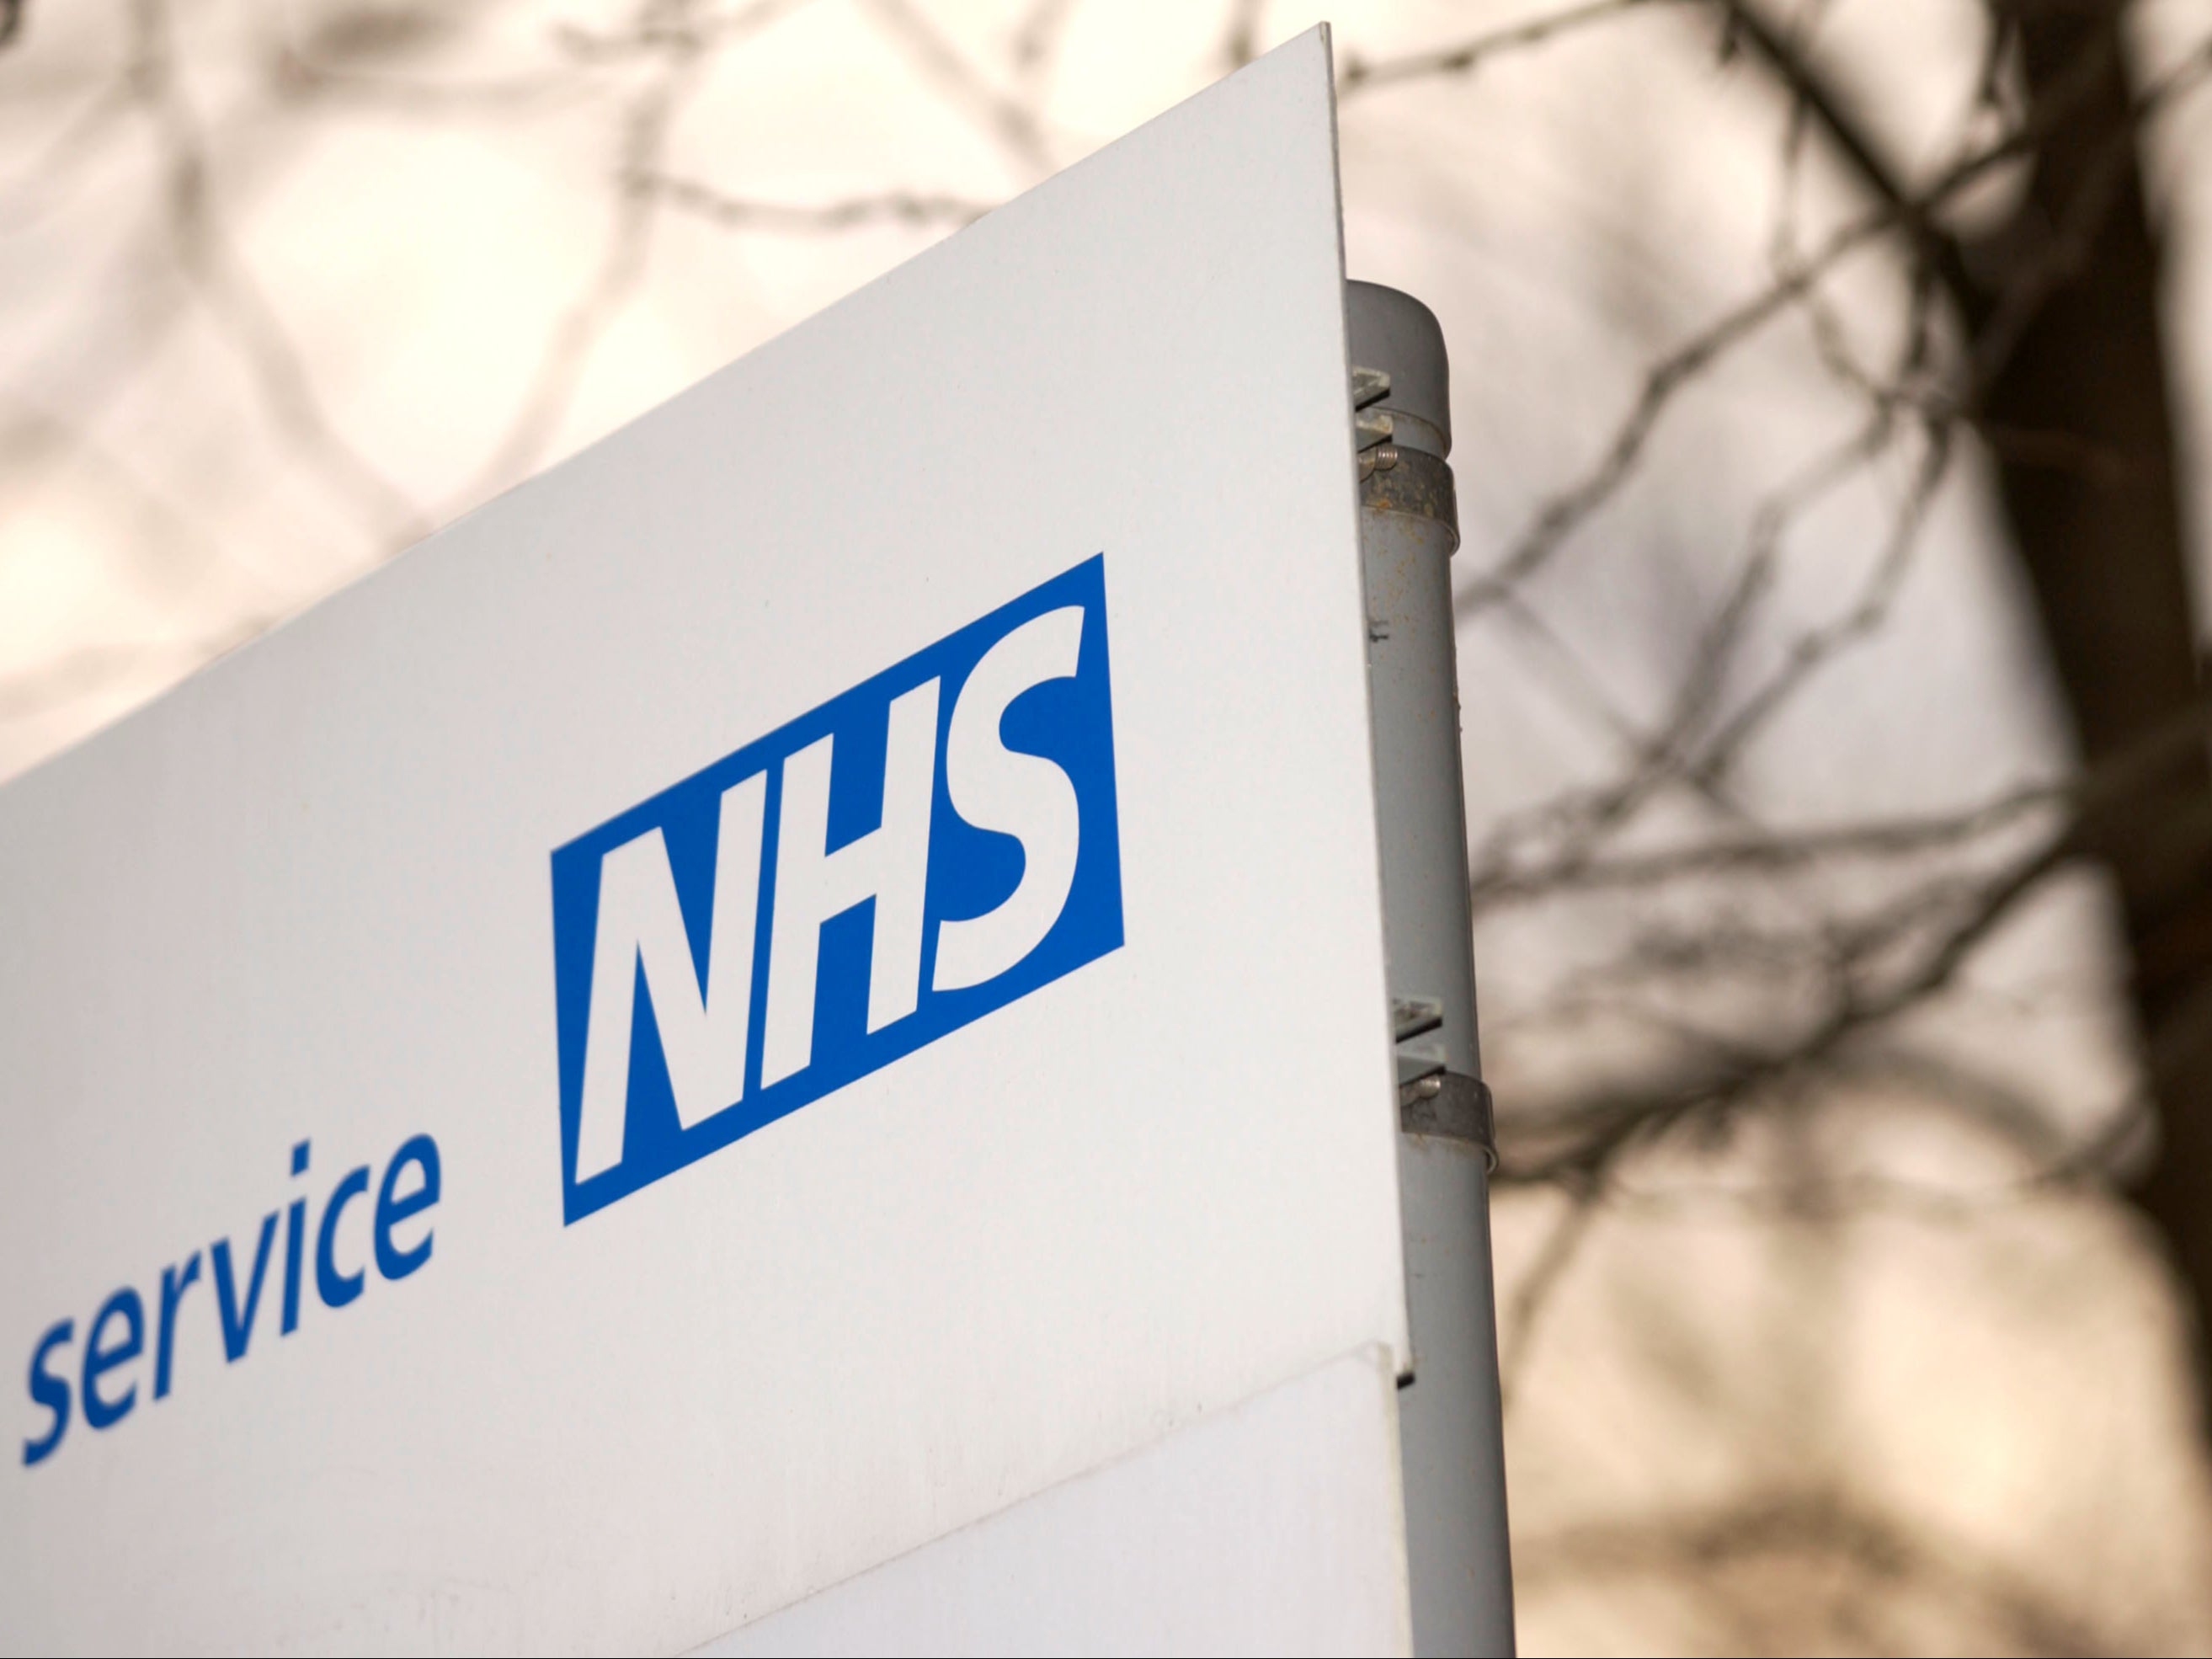 A former ward manager at the Cambridgeshire and Peterborough NHS Foundation Trust has been struck off the medical register